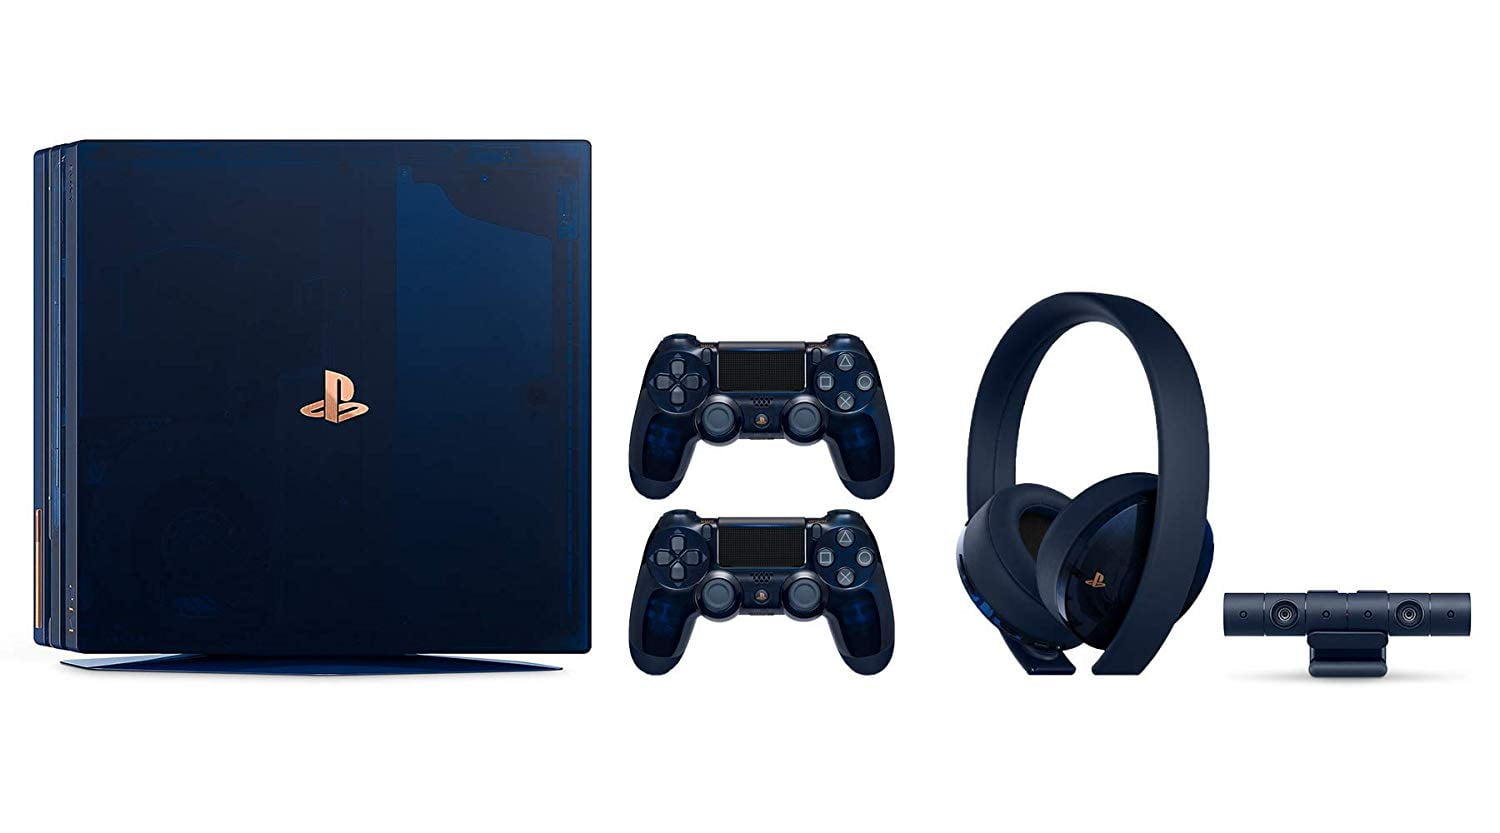 Playstation 4 PRO 500 Million Limited Edition Complete Collection:  Translucent Blue 2TB Playstation 4 Pro Bundle (Limited to 50,000 Units  Worldwide) with Extra Wireless Controller and Headset